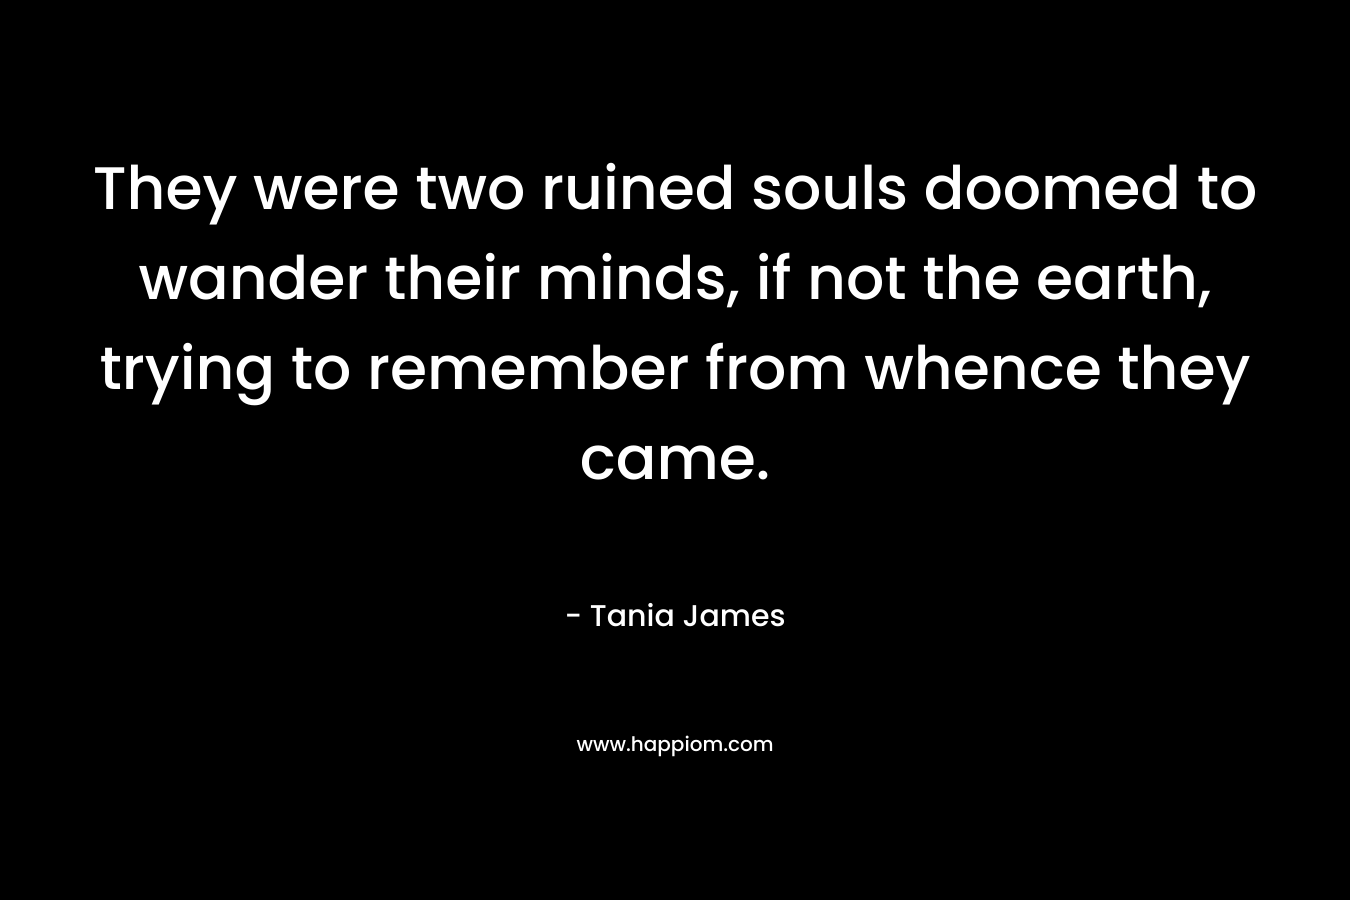 They were two ruined souls doomed to wander their minds, if not the earth, trying to remember from whence they came.